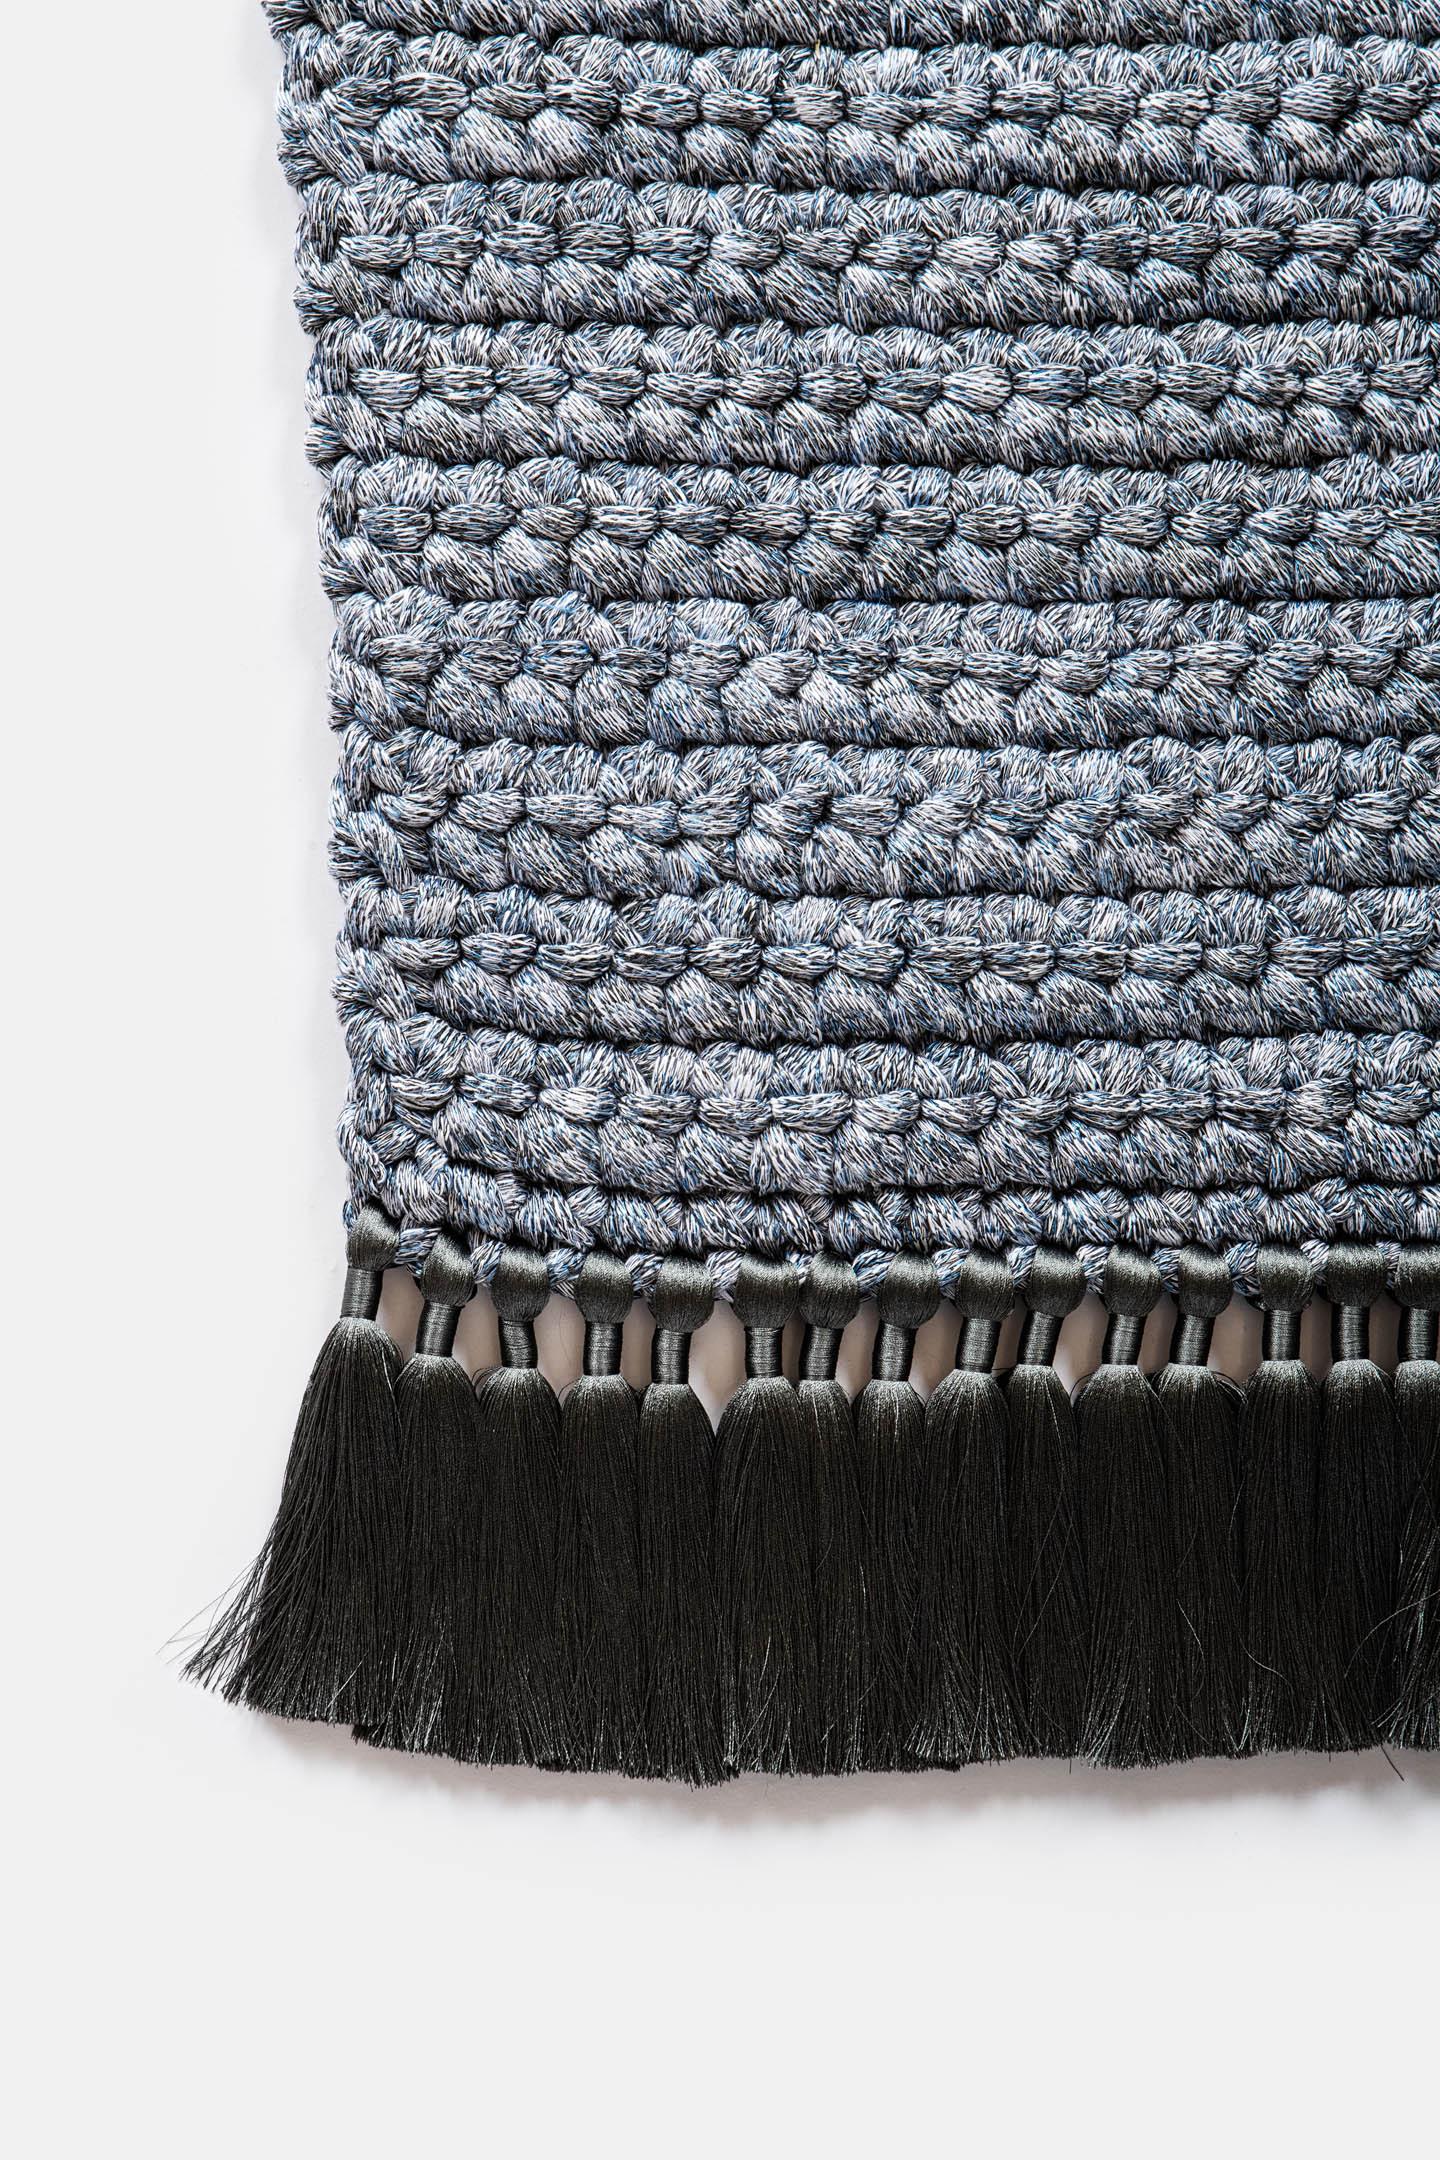 Israeli Handmade Crochet Thick rug in Blue Grey made of Cotton & Polyester by iota